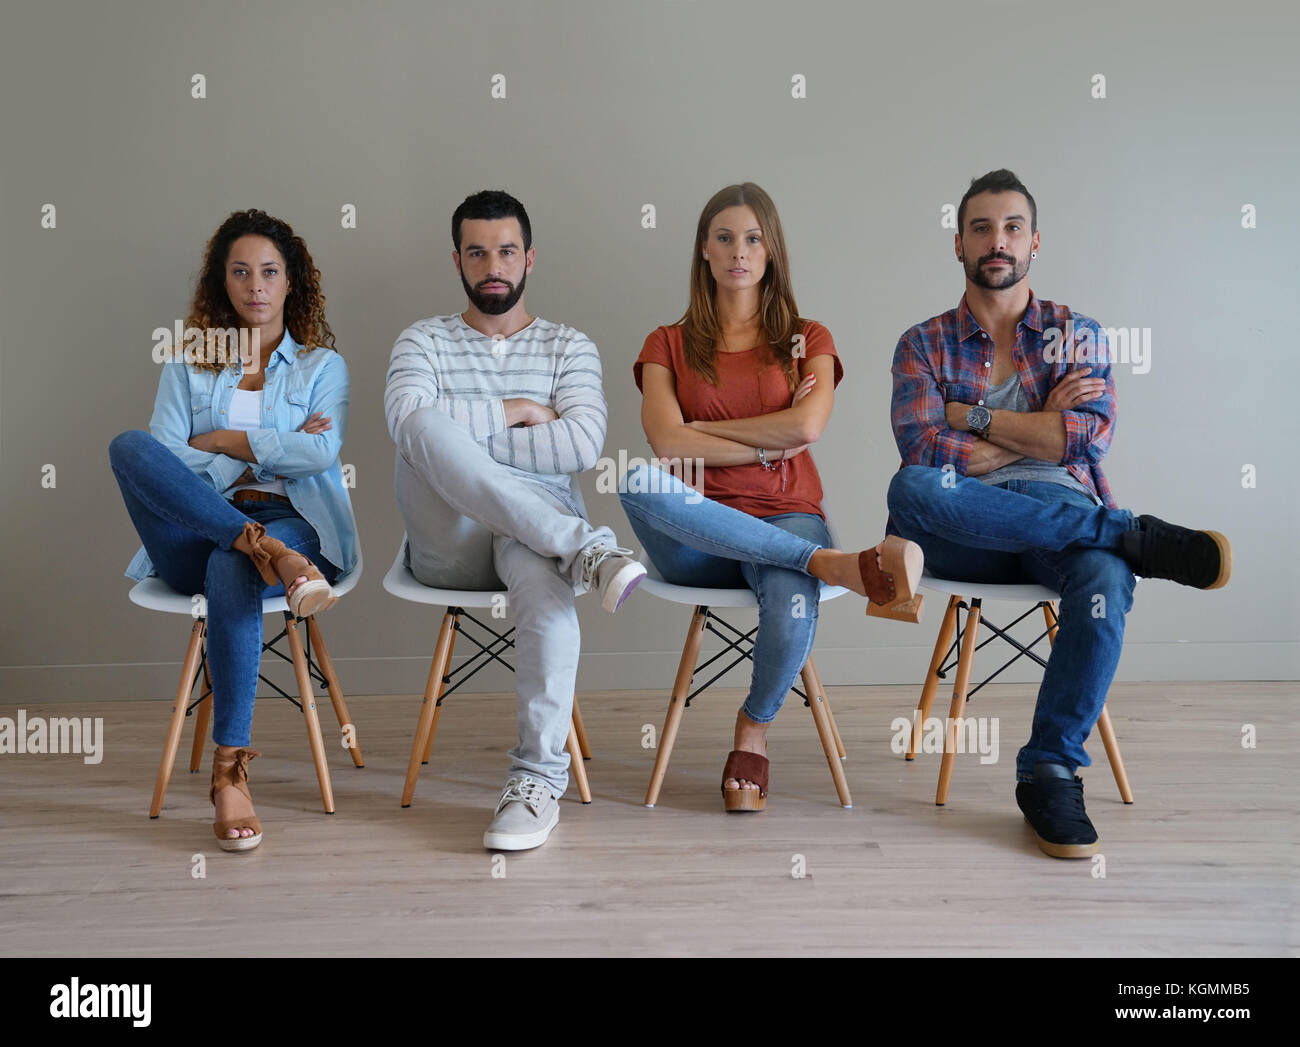 Group of young people sitting on chairs, isolated Stock Photo